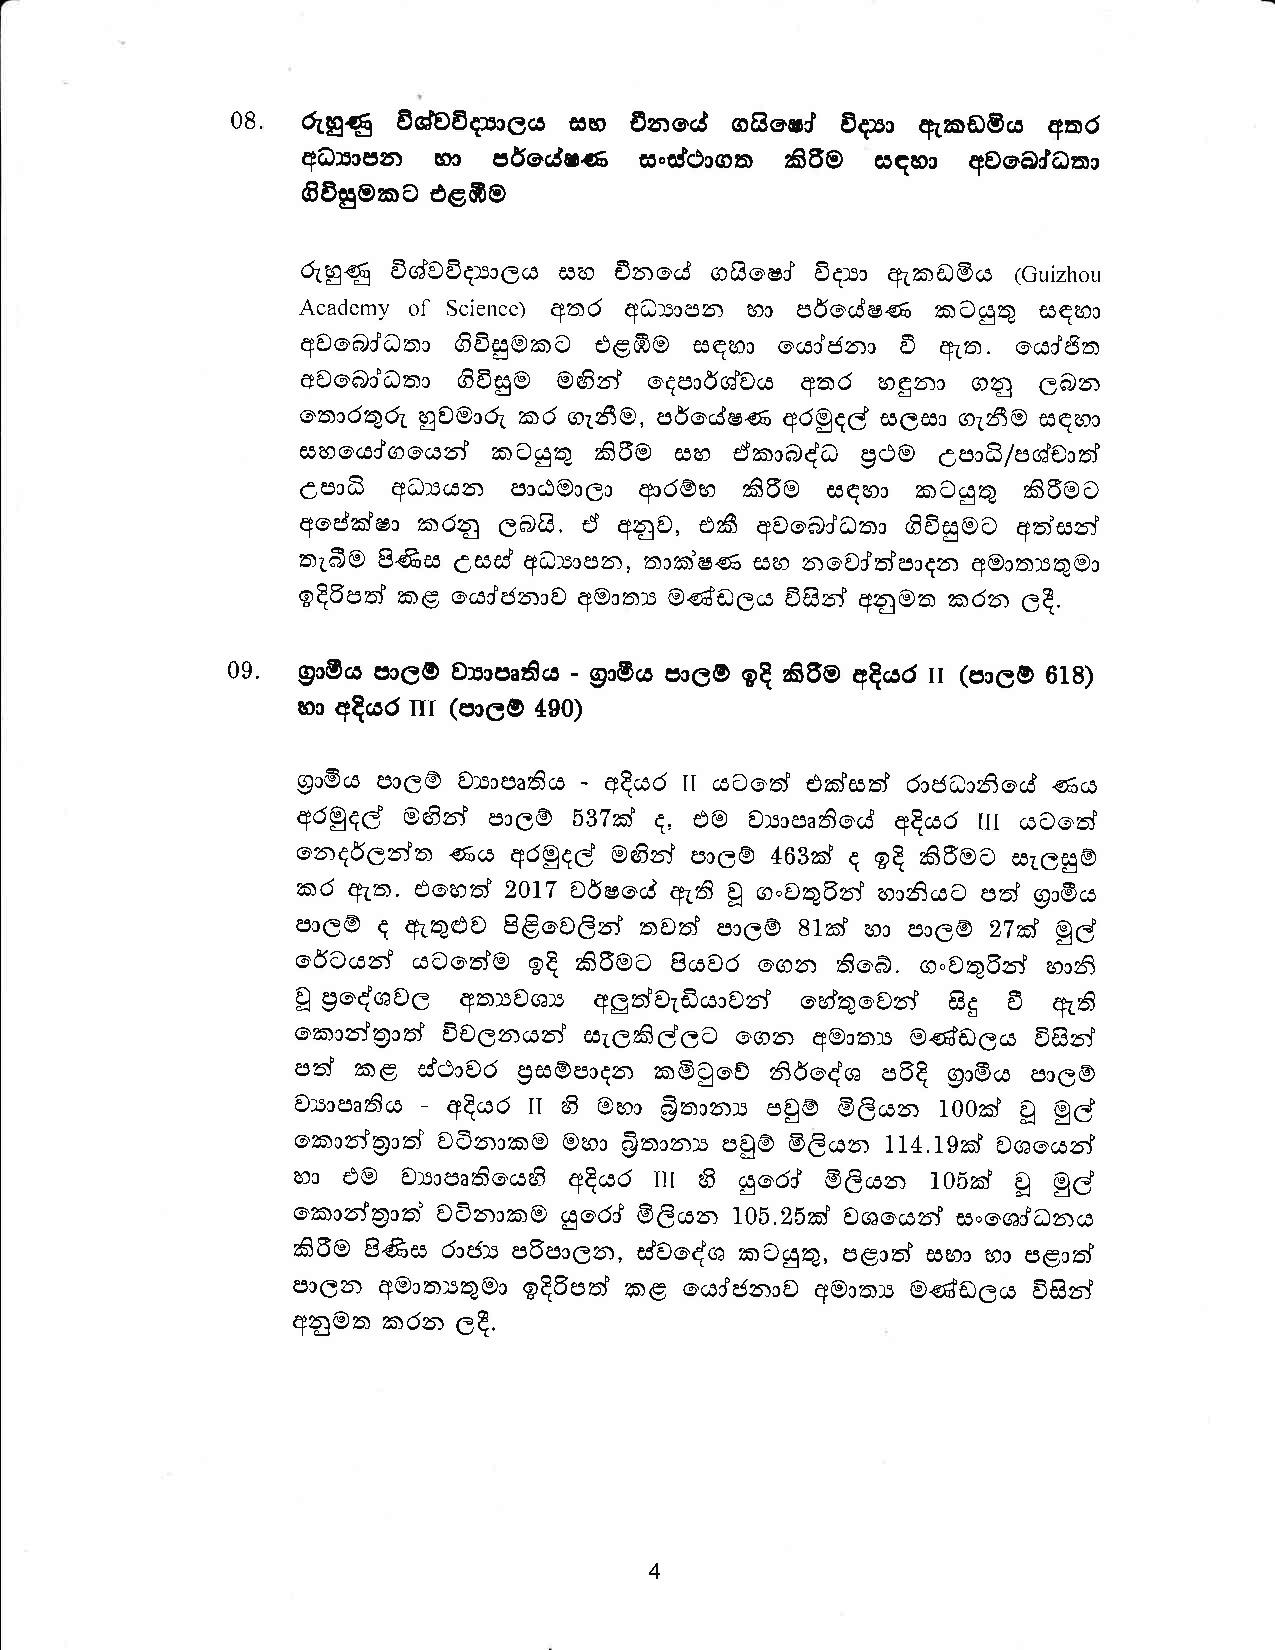 Cabinet Decision on 08.07.2020S page 004